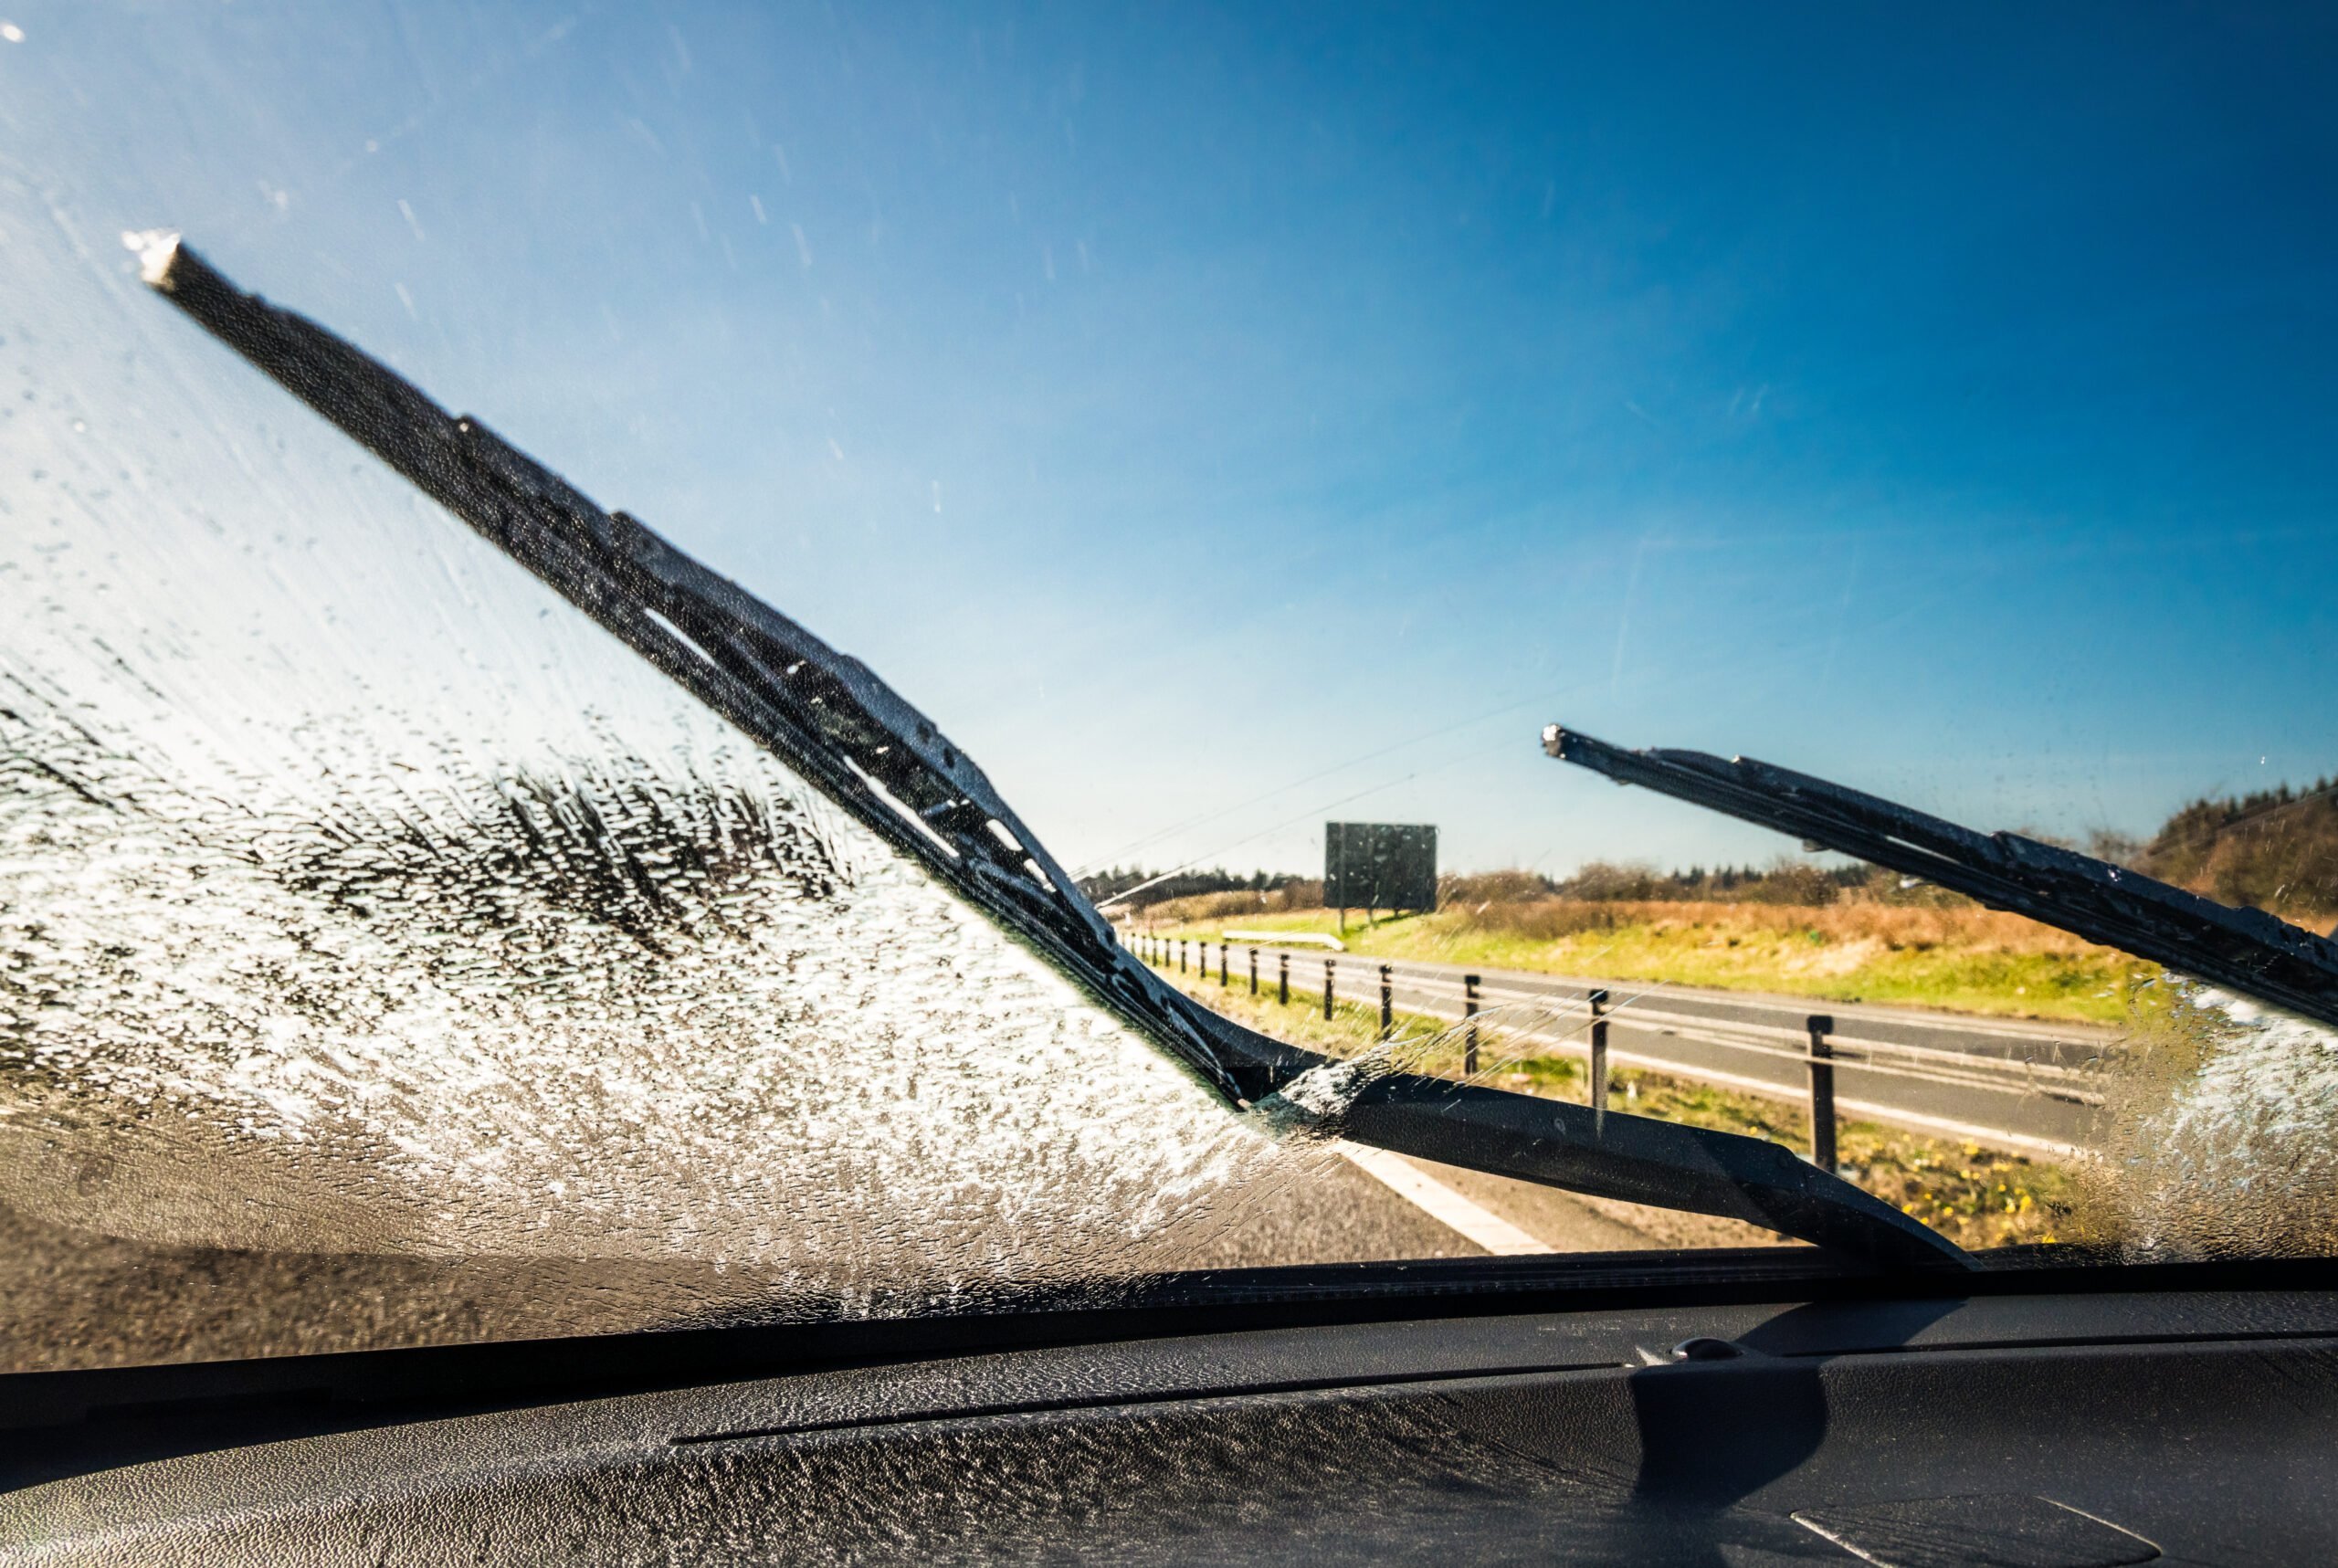 Importance of car wipers. For safety on the road, windshield…